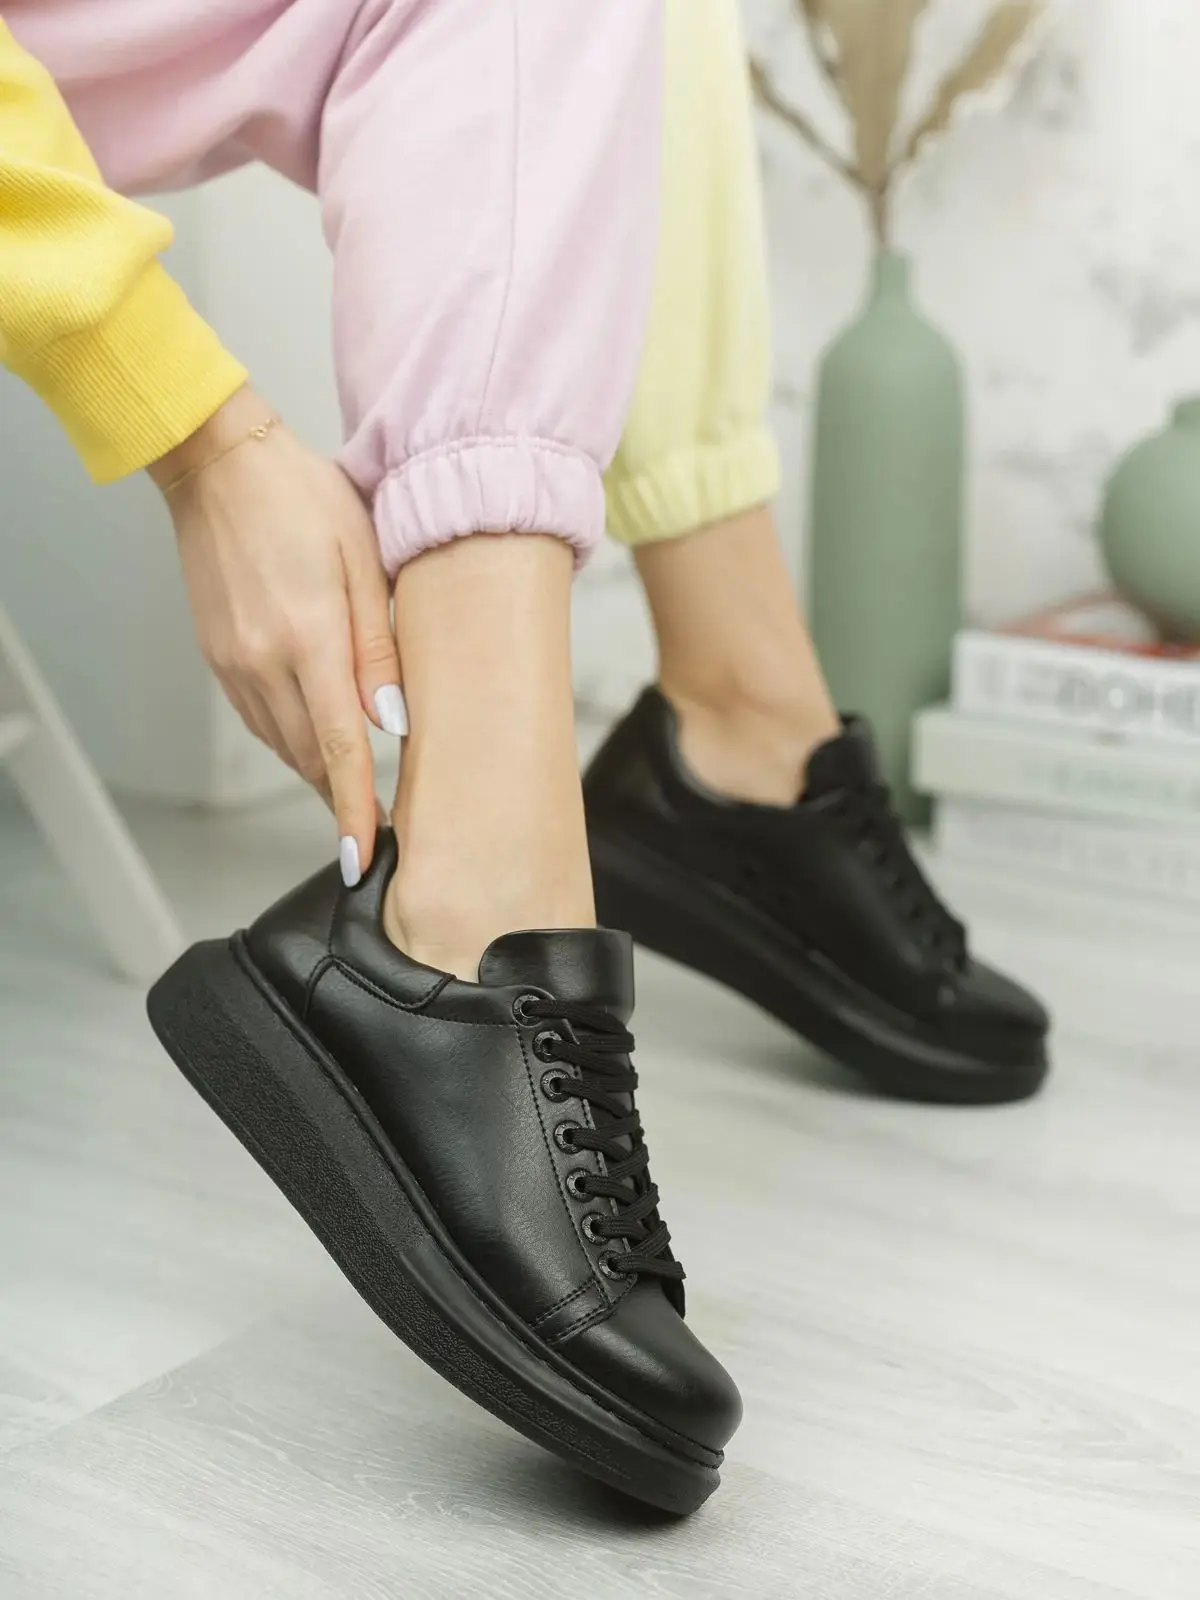 Chekich Black Color Dark Sole Lace-up Artificial Leather Women Shoes Orthopedic Odorless Eco-Friendly 4 Seasons Vegan CH257